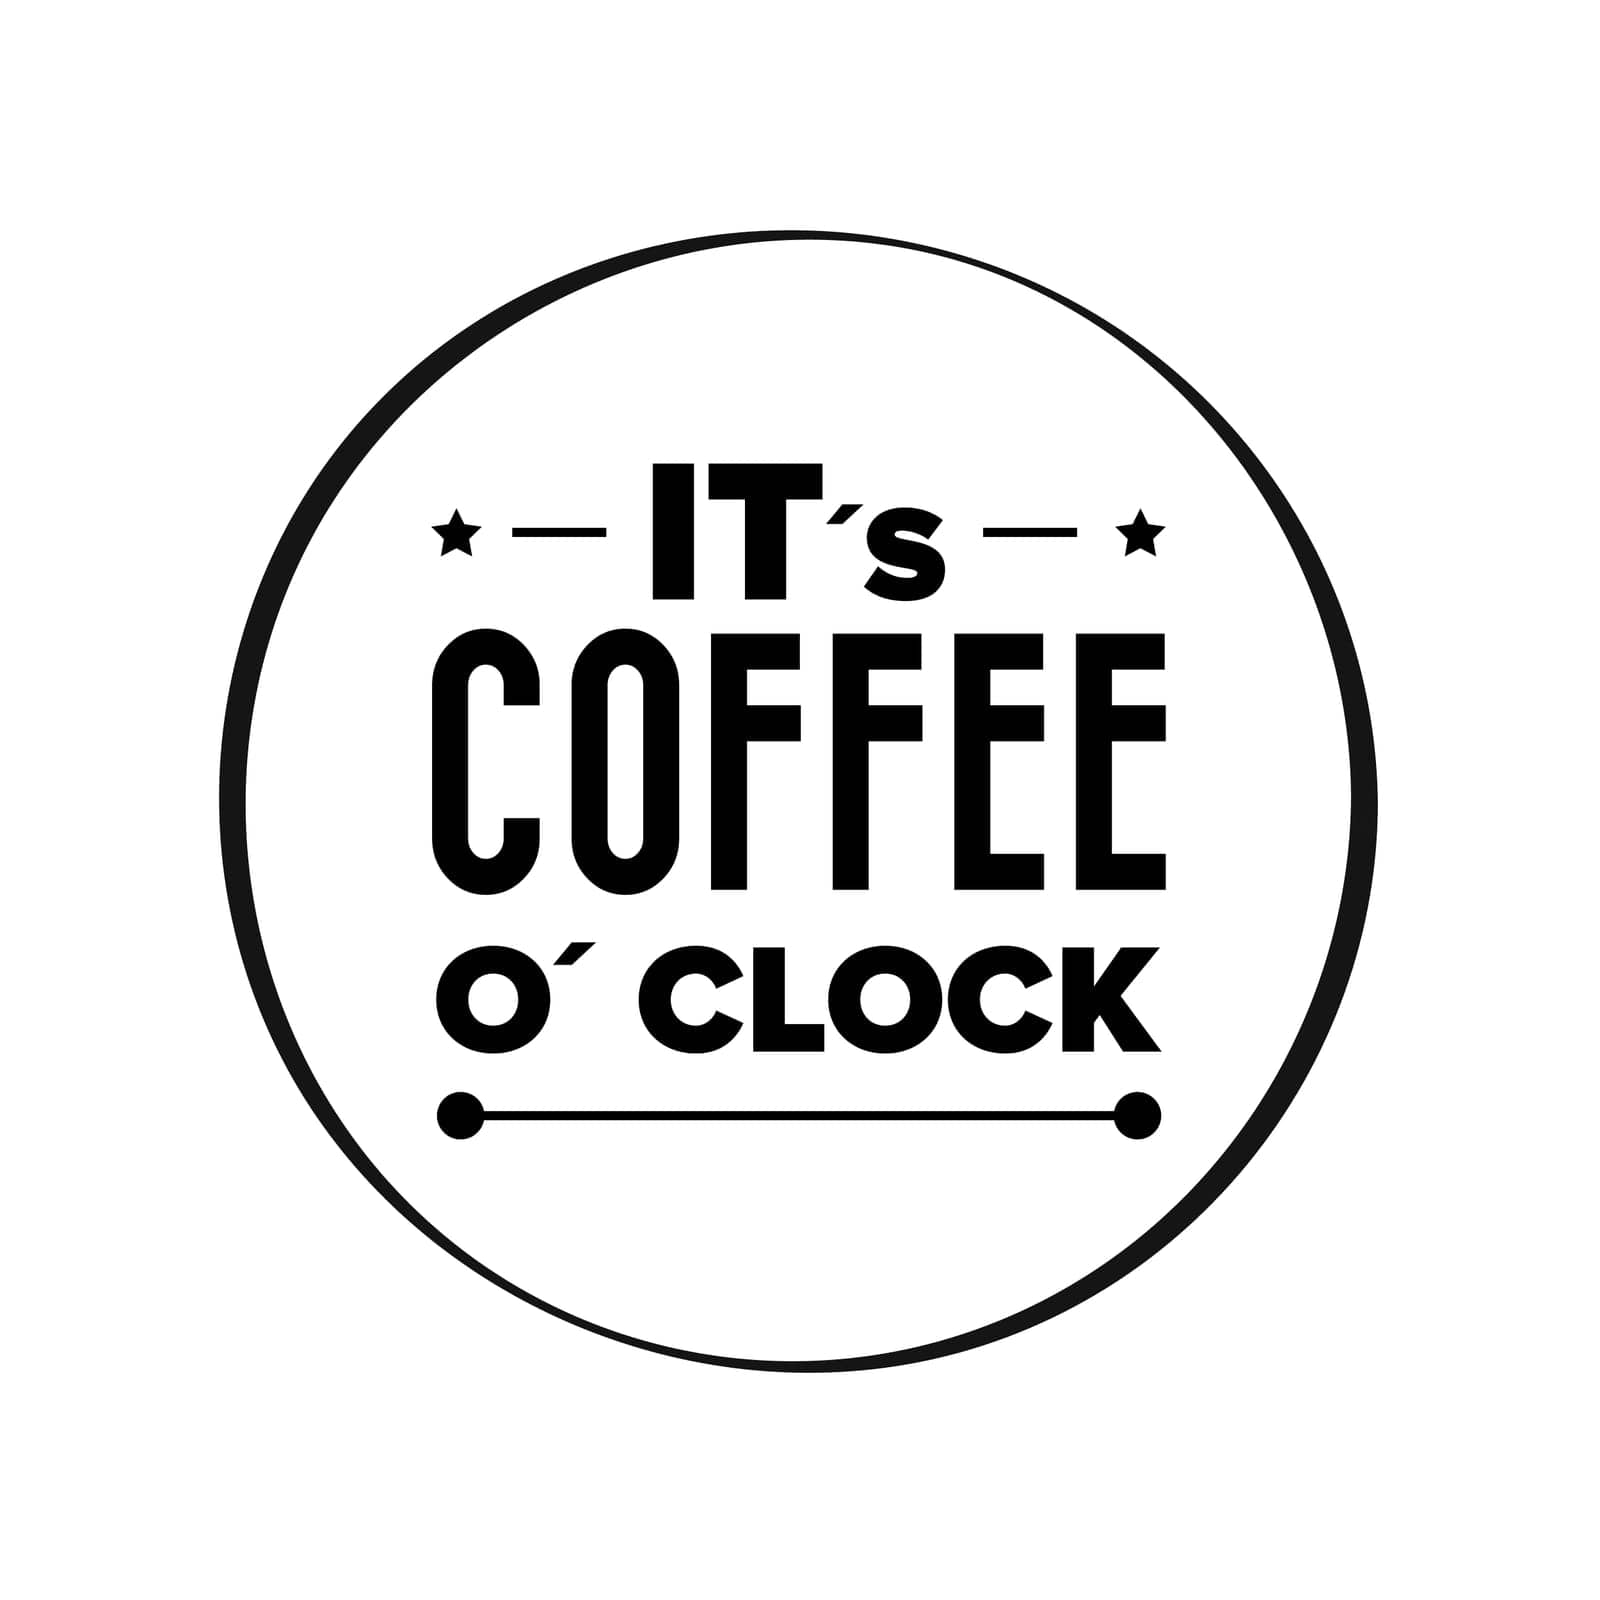 Its coffee o clock sign vector